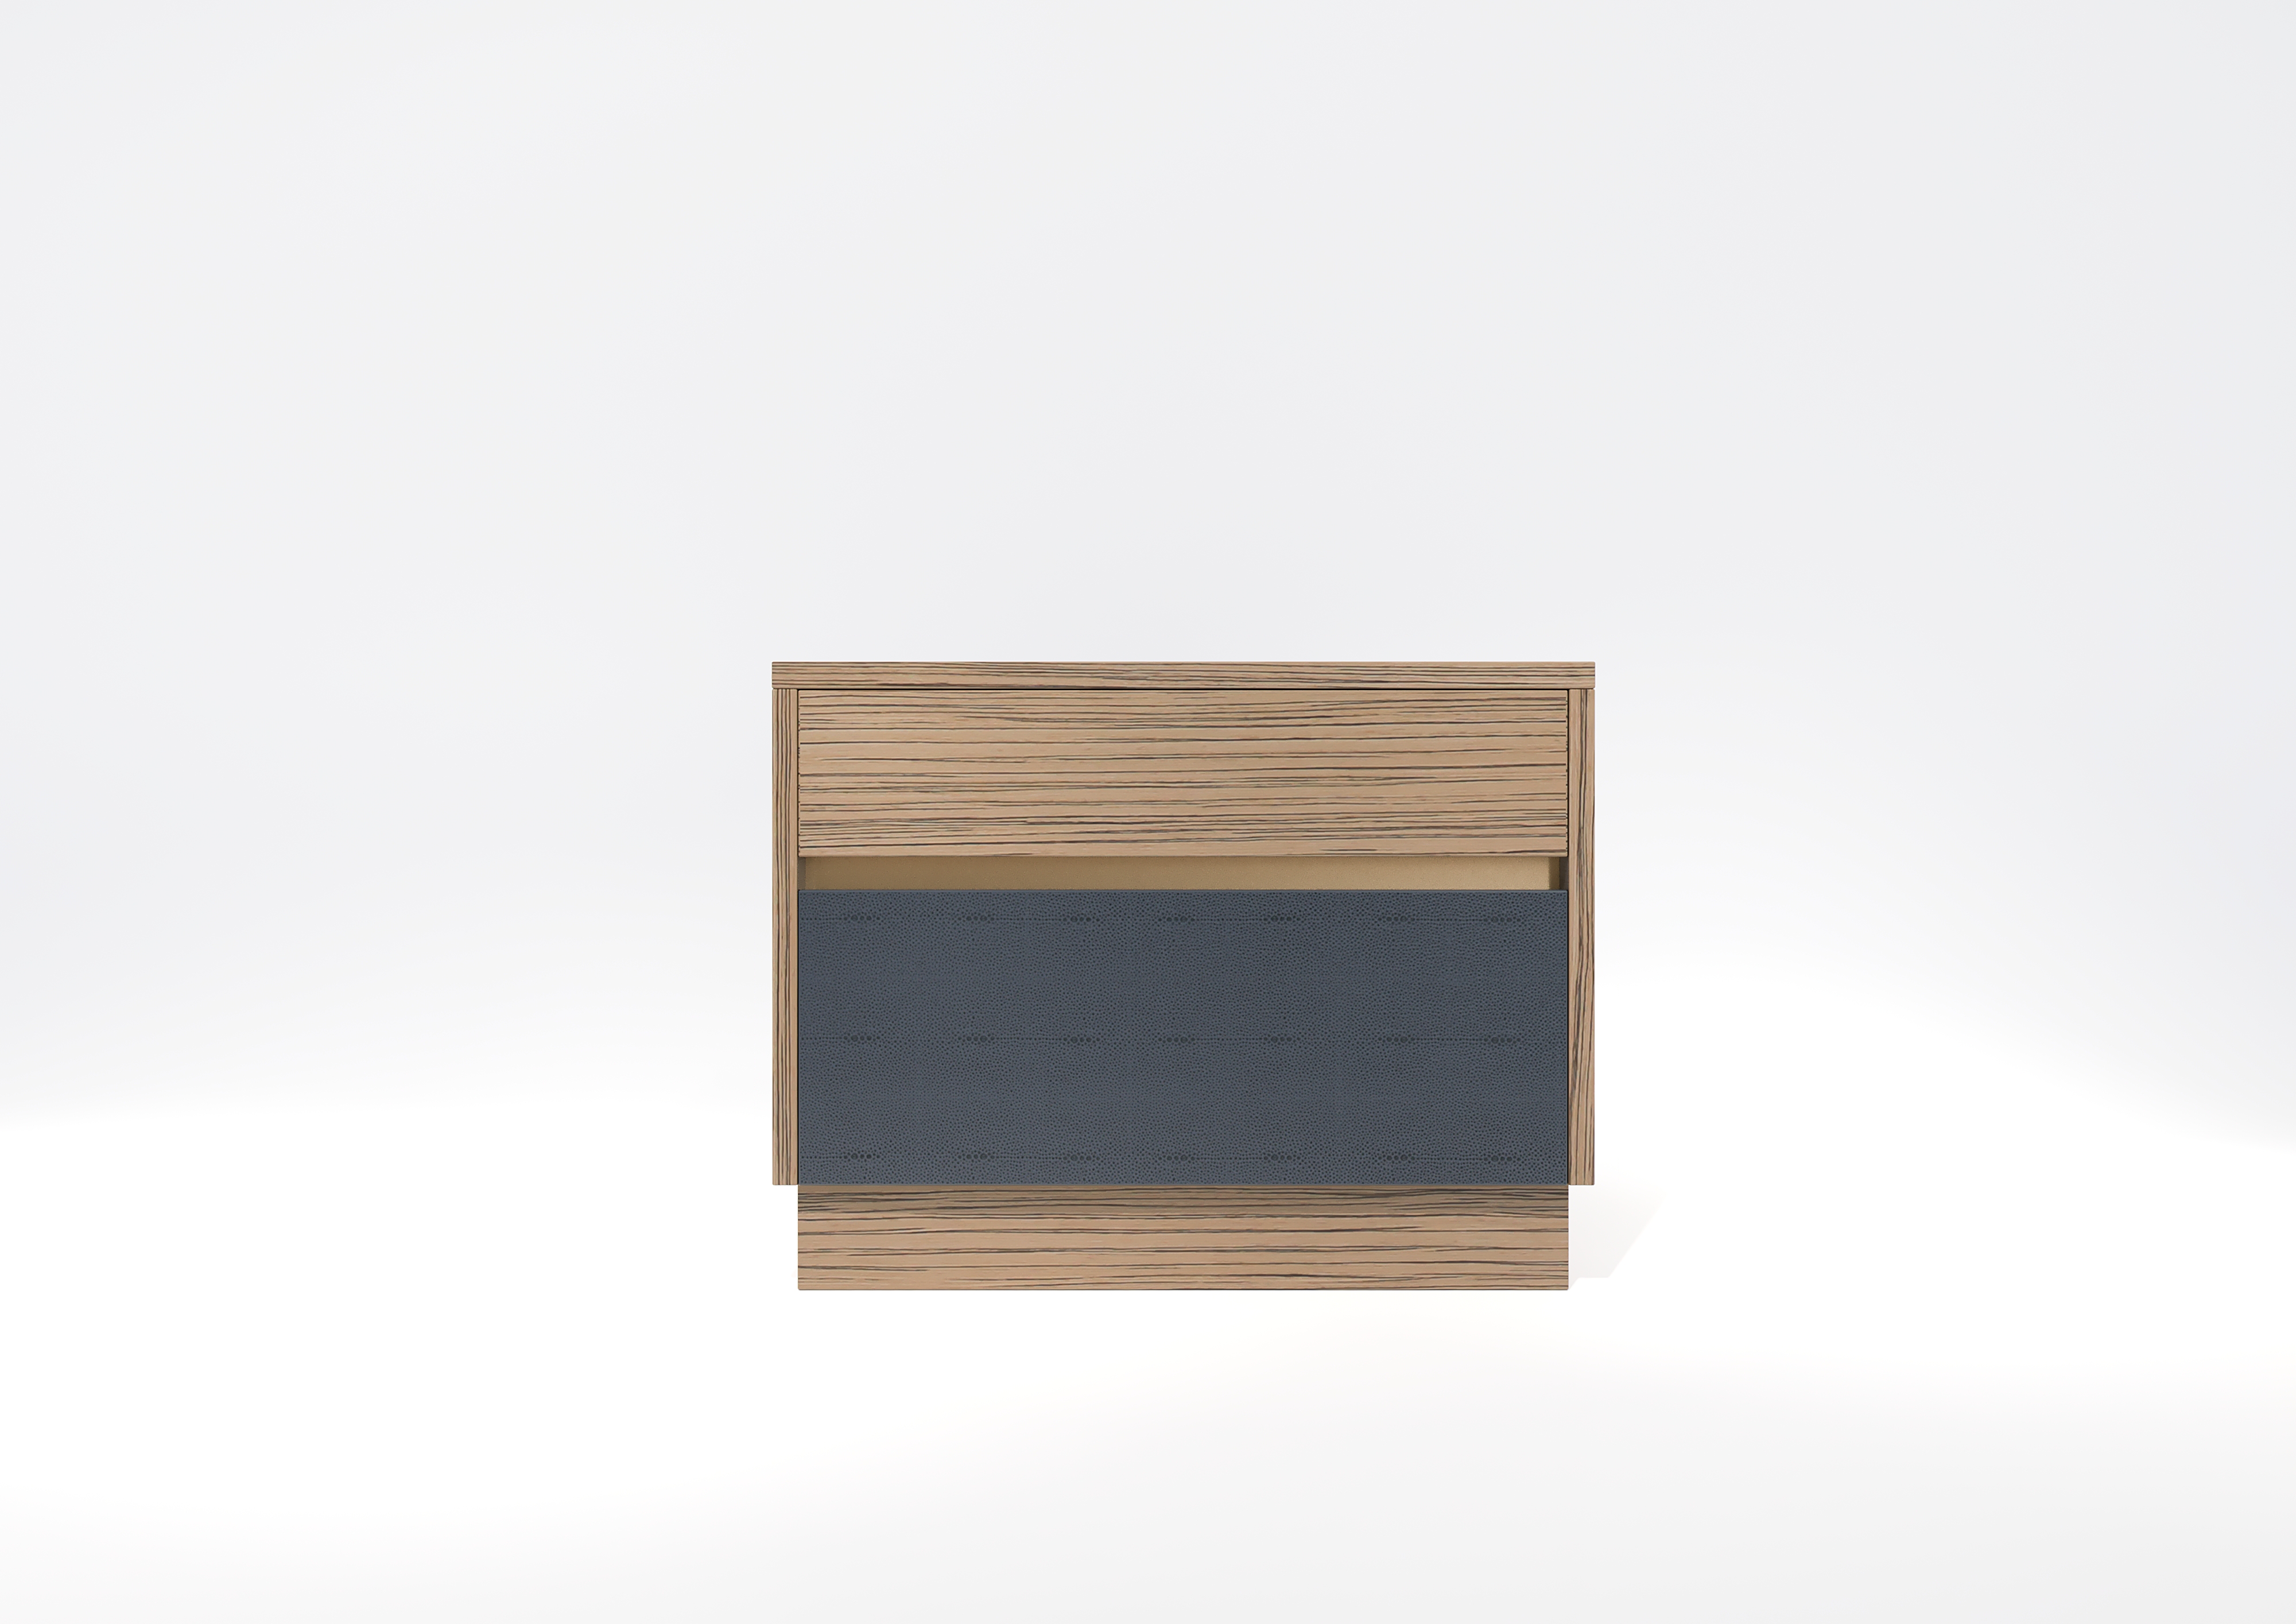 Downing Nightstand V2 Wood Edition #10 – $3,255.00